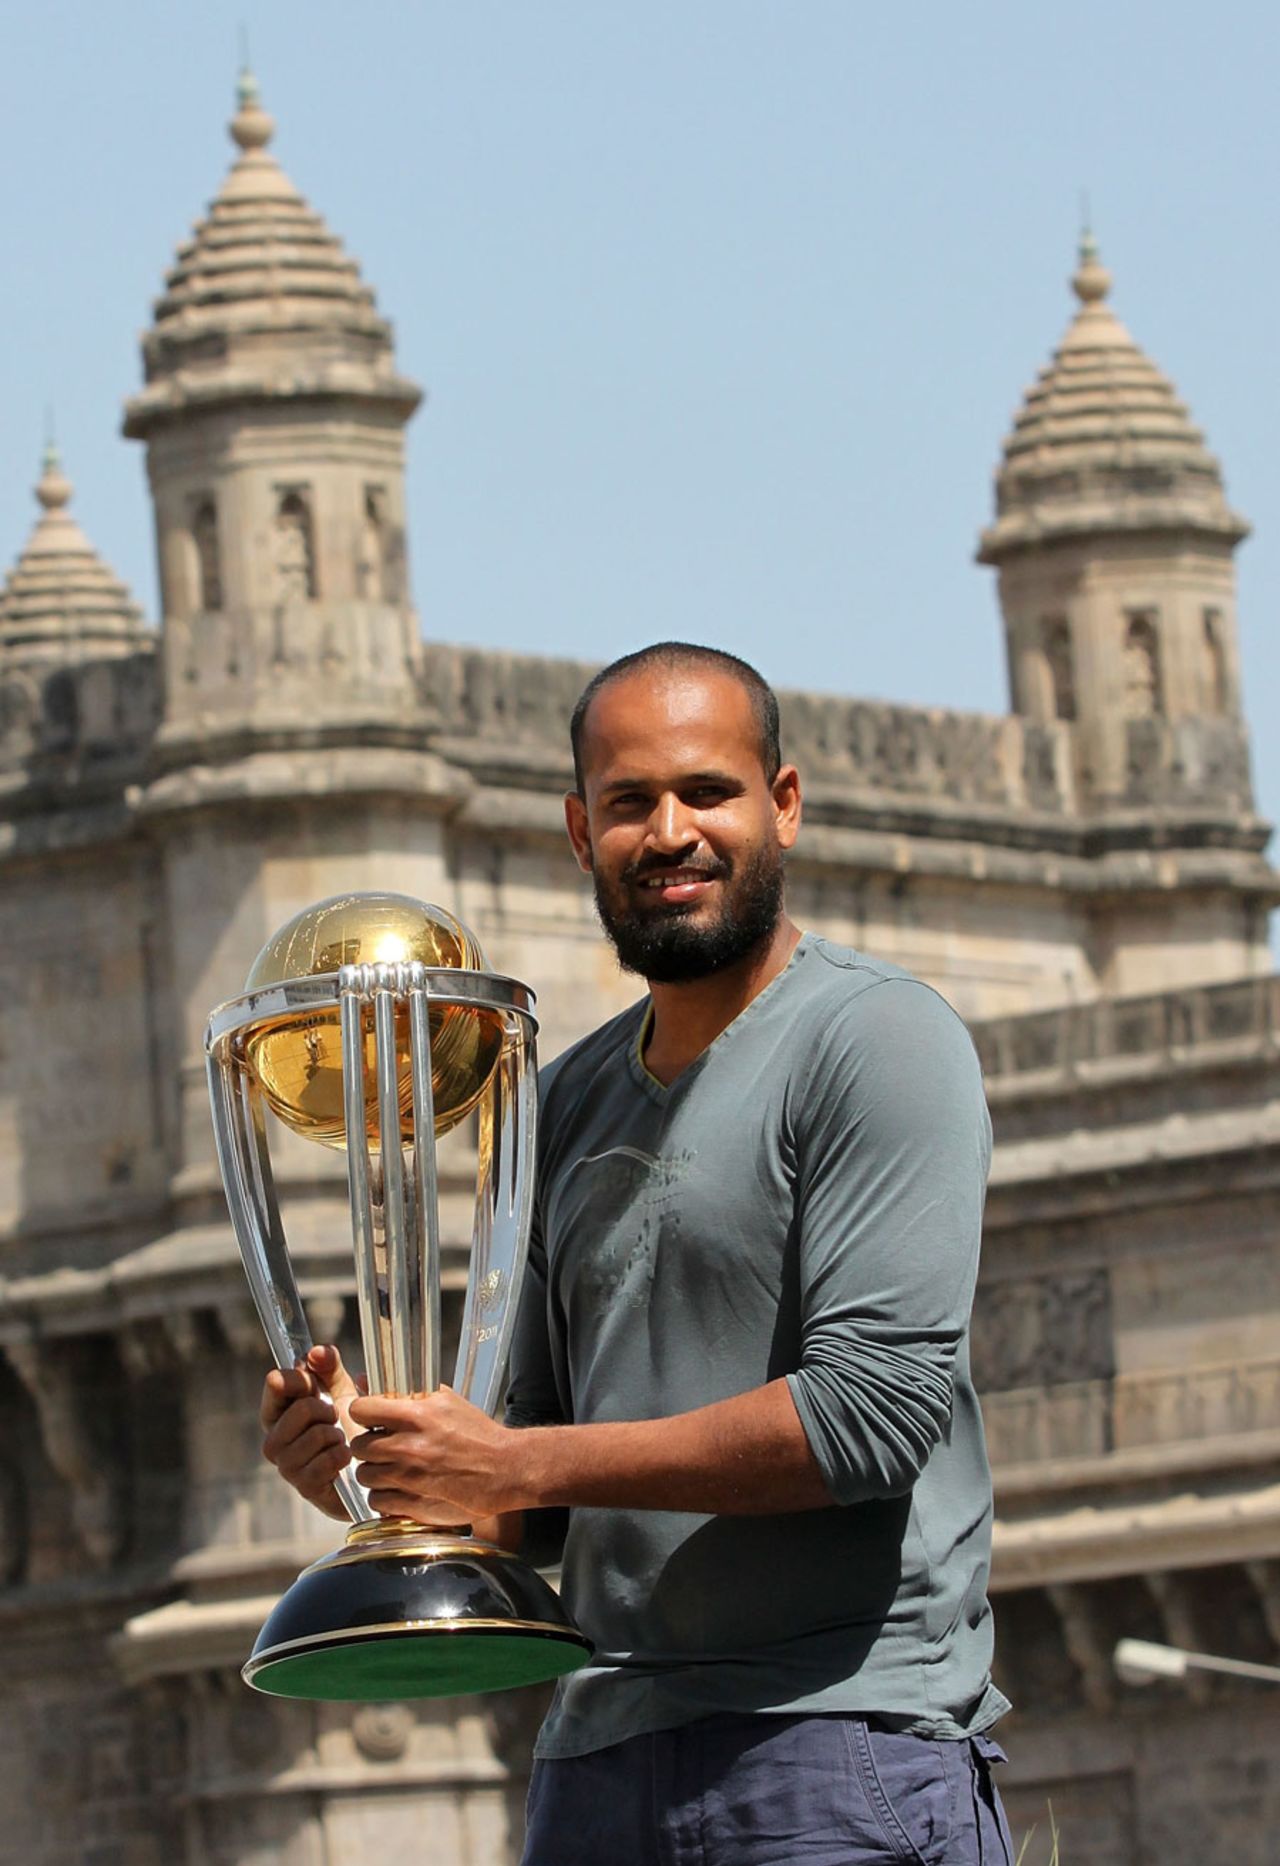 Yusuf Pathan poses with the World Cup, Mumbai, April 3, 2011